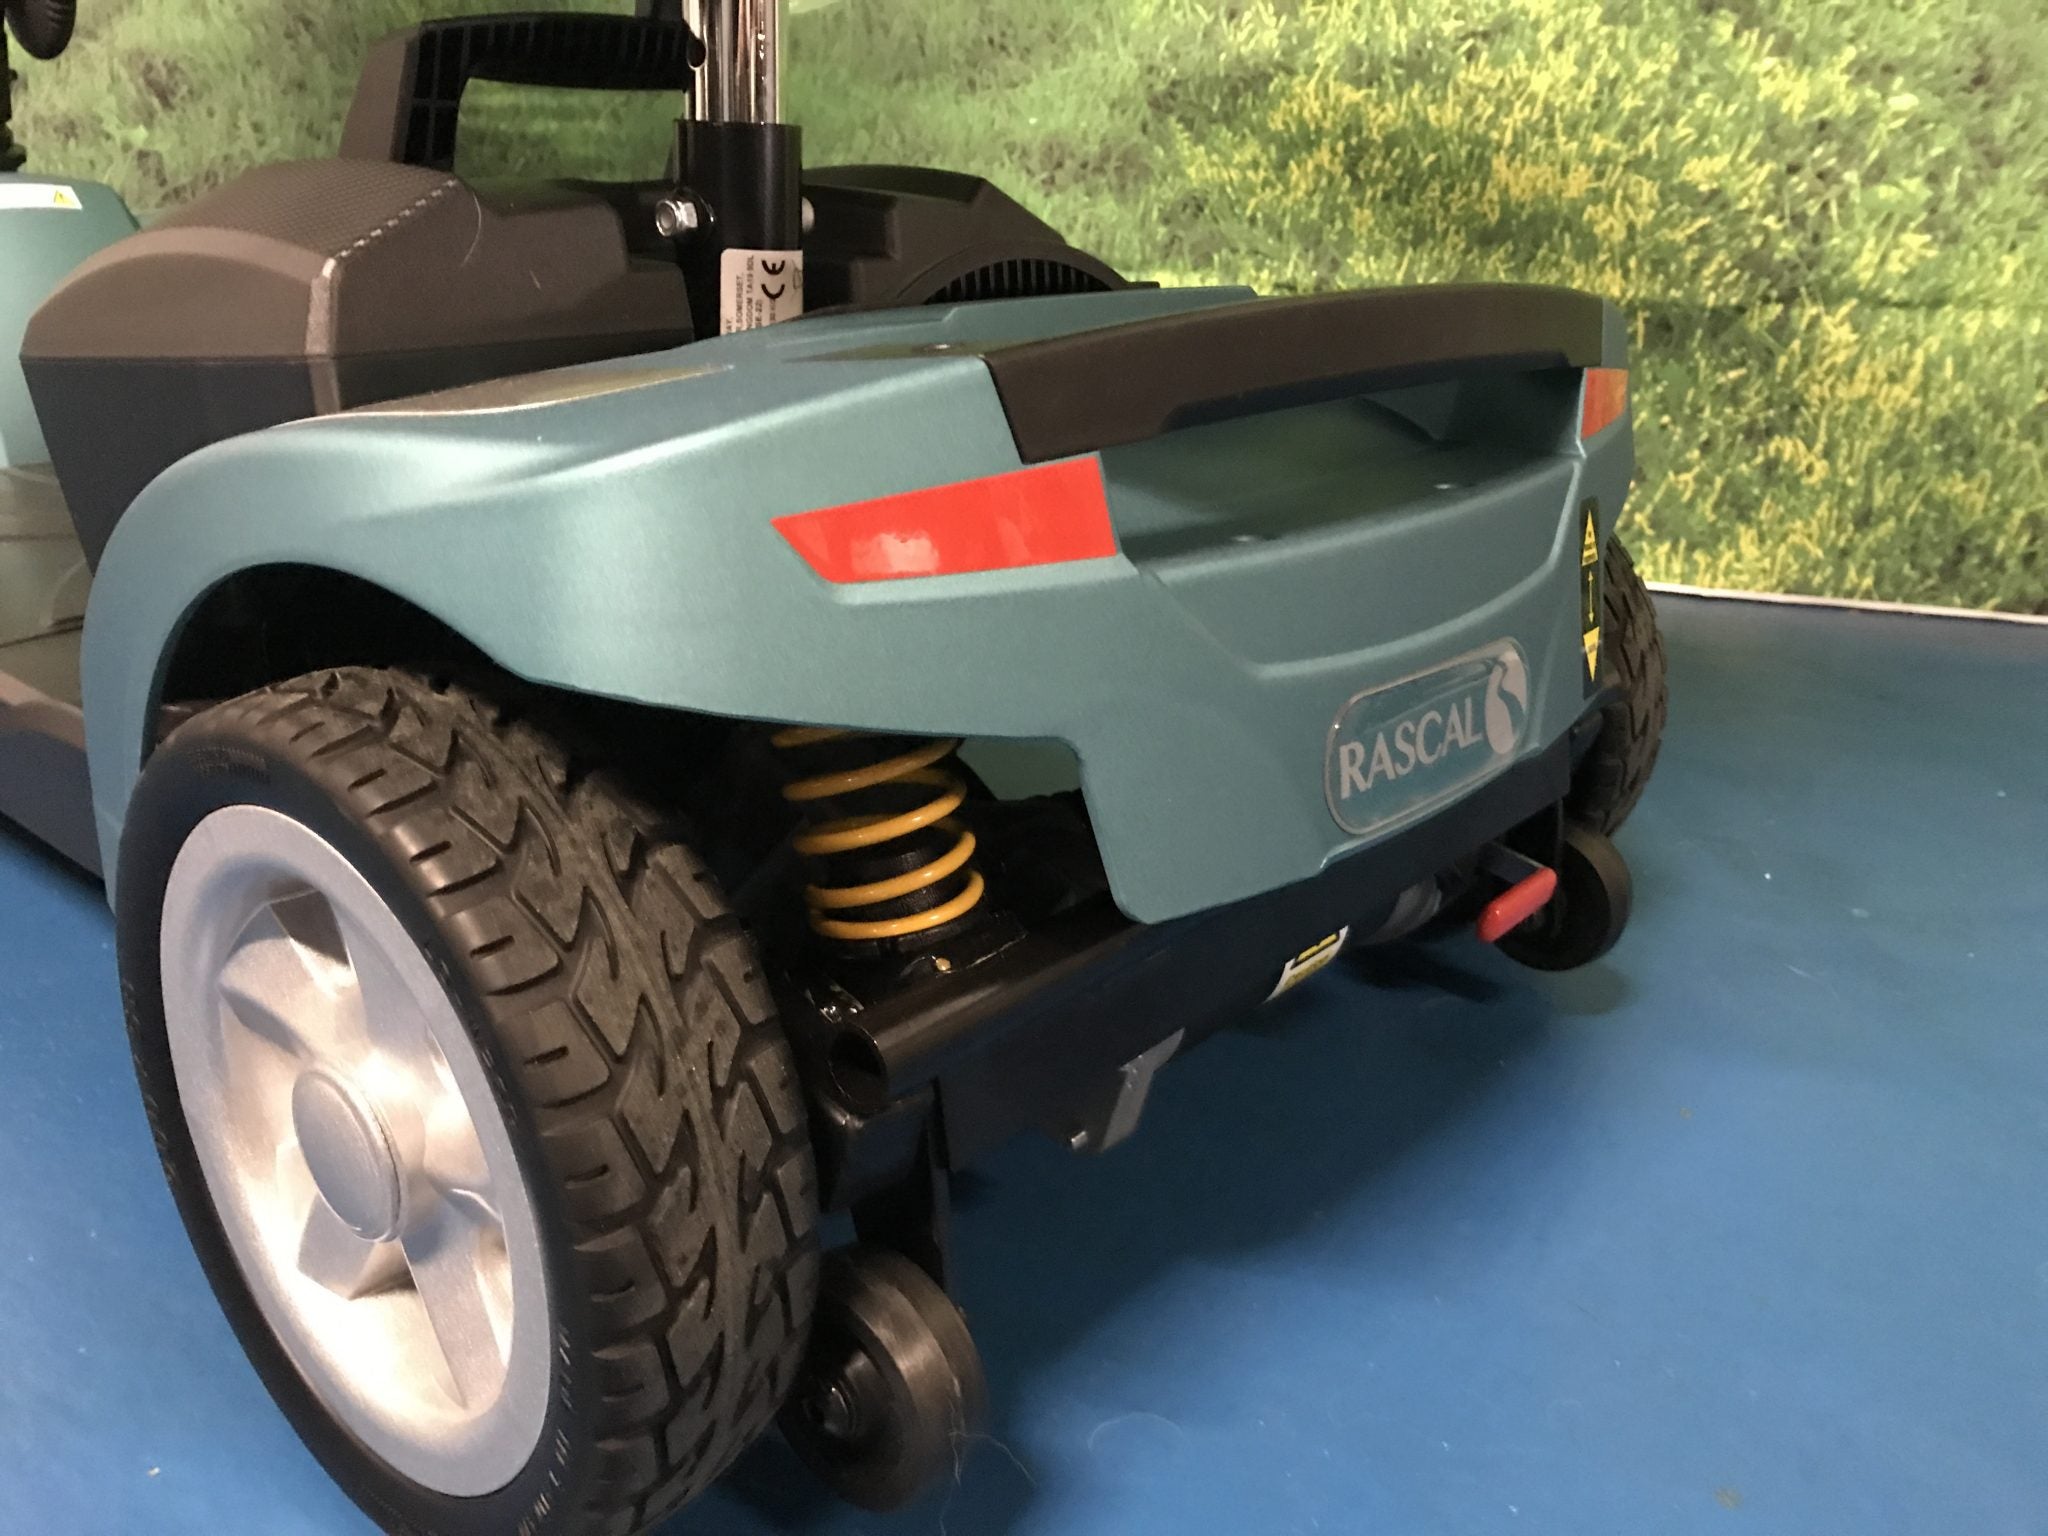 New Rascal Veo Sport from Electric Mobility 4mph Transportable Mobility Scooter